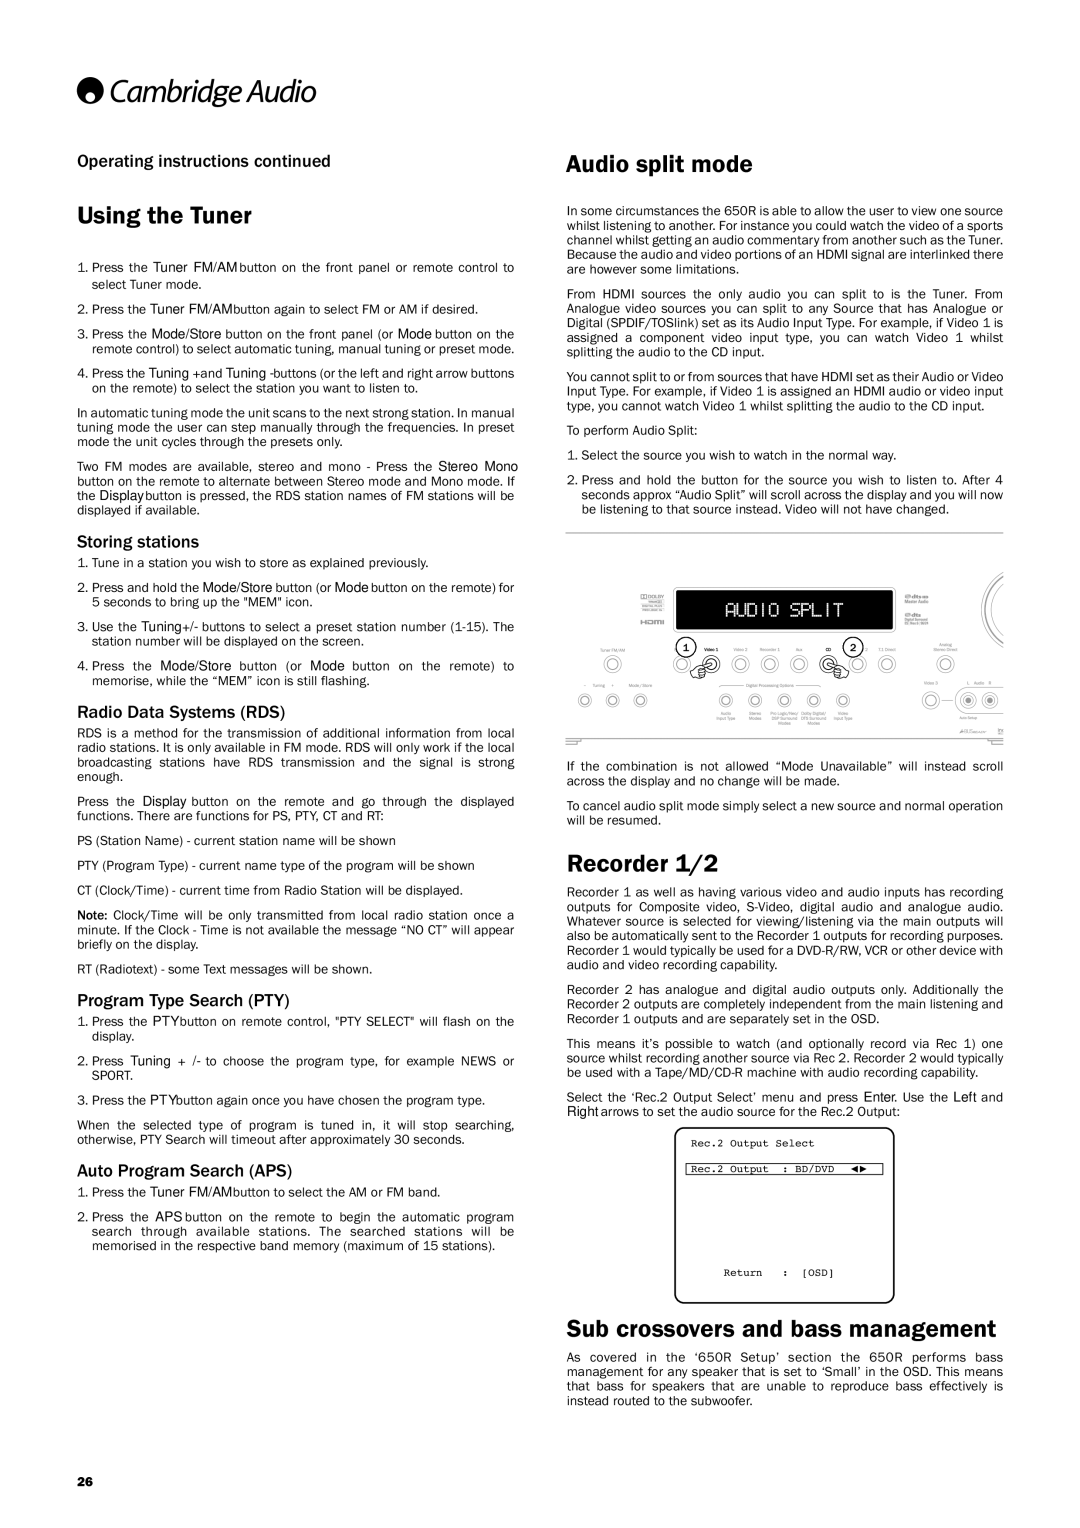 Cambridge Audio 650R user manual Using the Tuner, Audio split mode, Recorder 1/2, Sub crossovers and bass management 